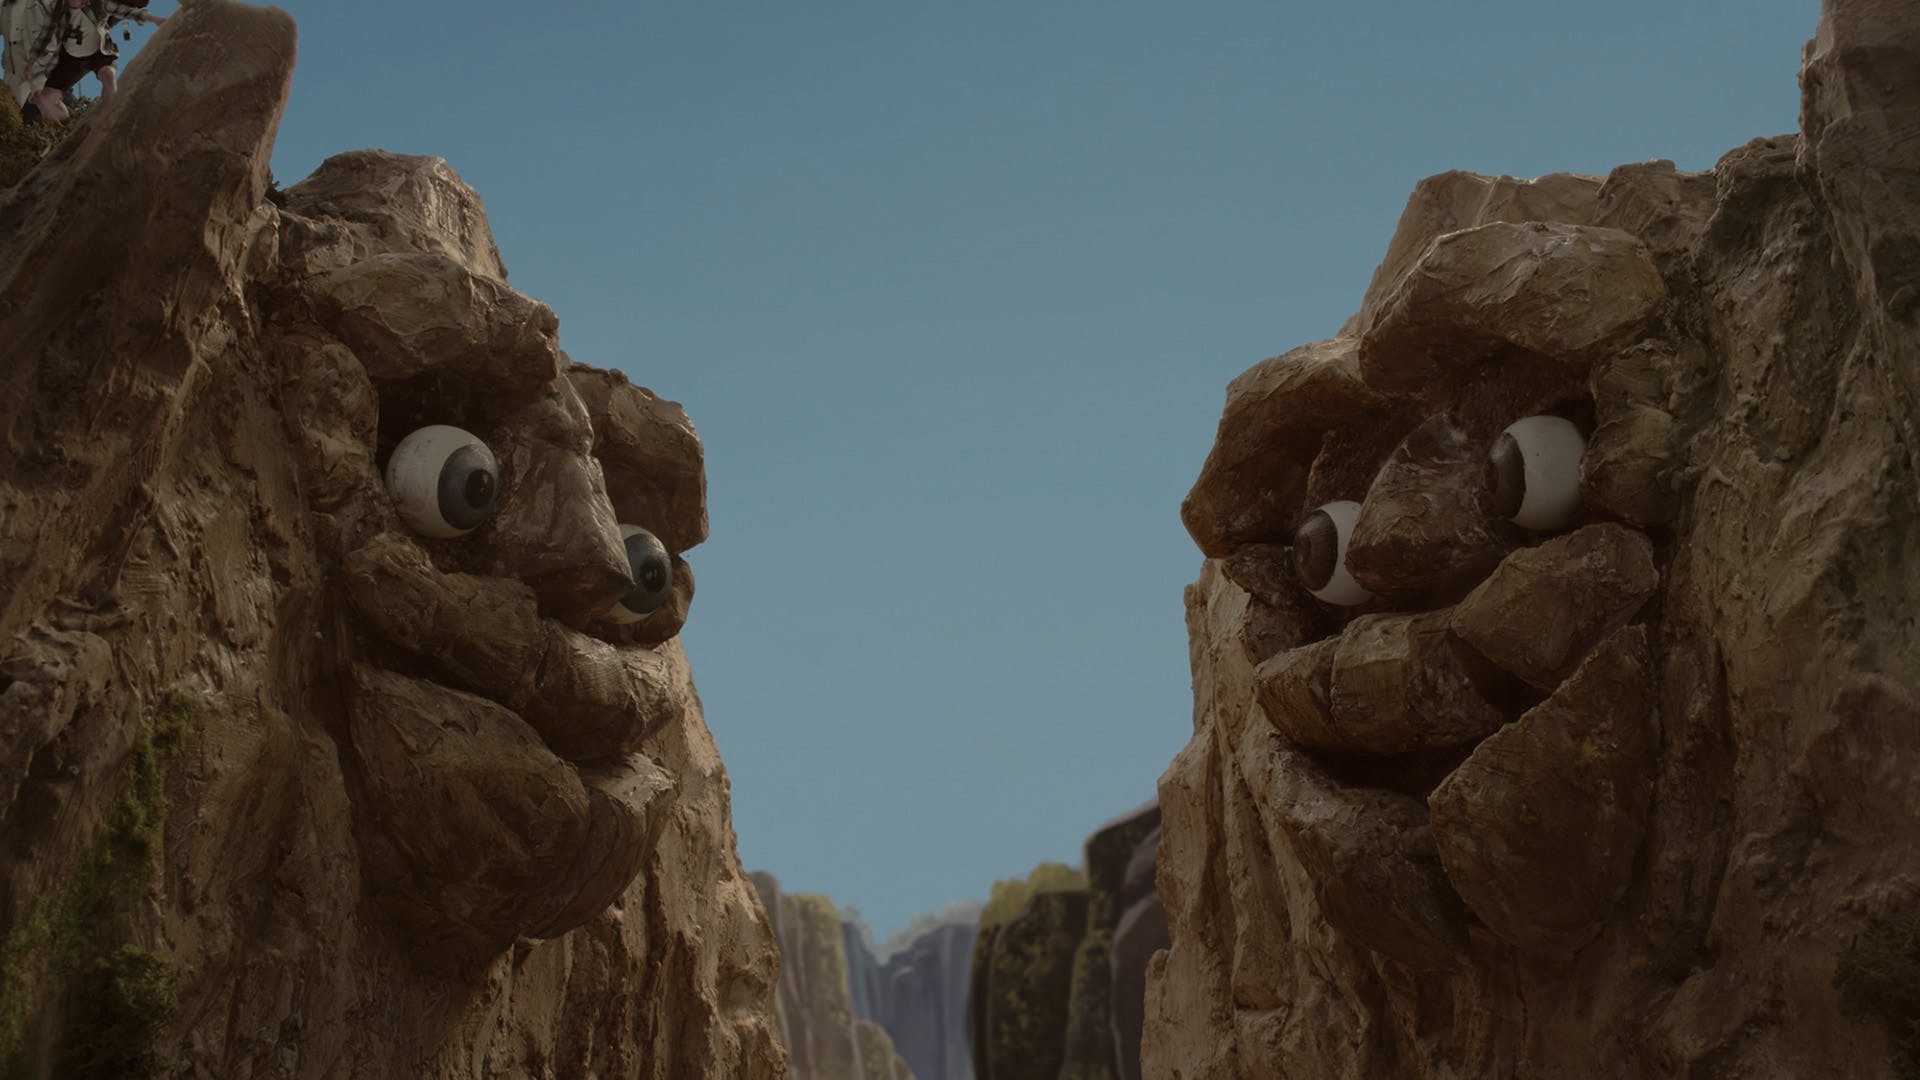 Still image of two mountains with faces looking at each other, from an animated campaign to promote travel to Oregon by Wieden + Kennedy Portland